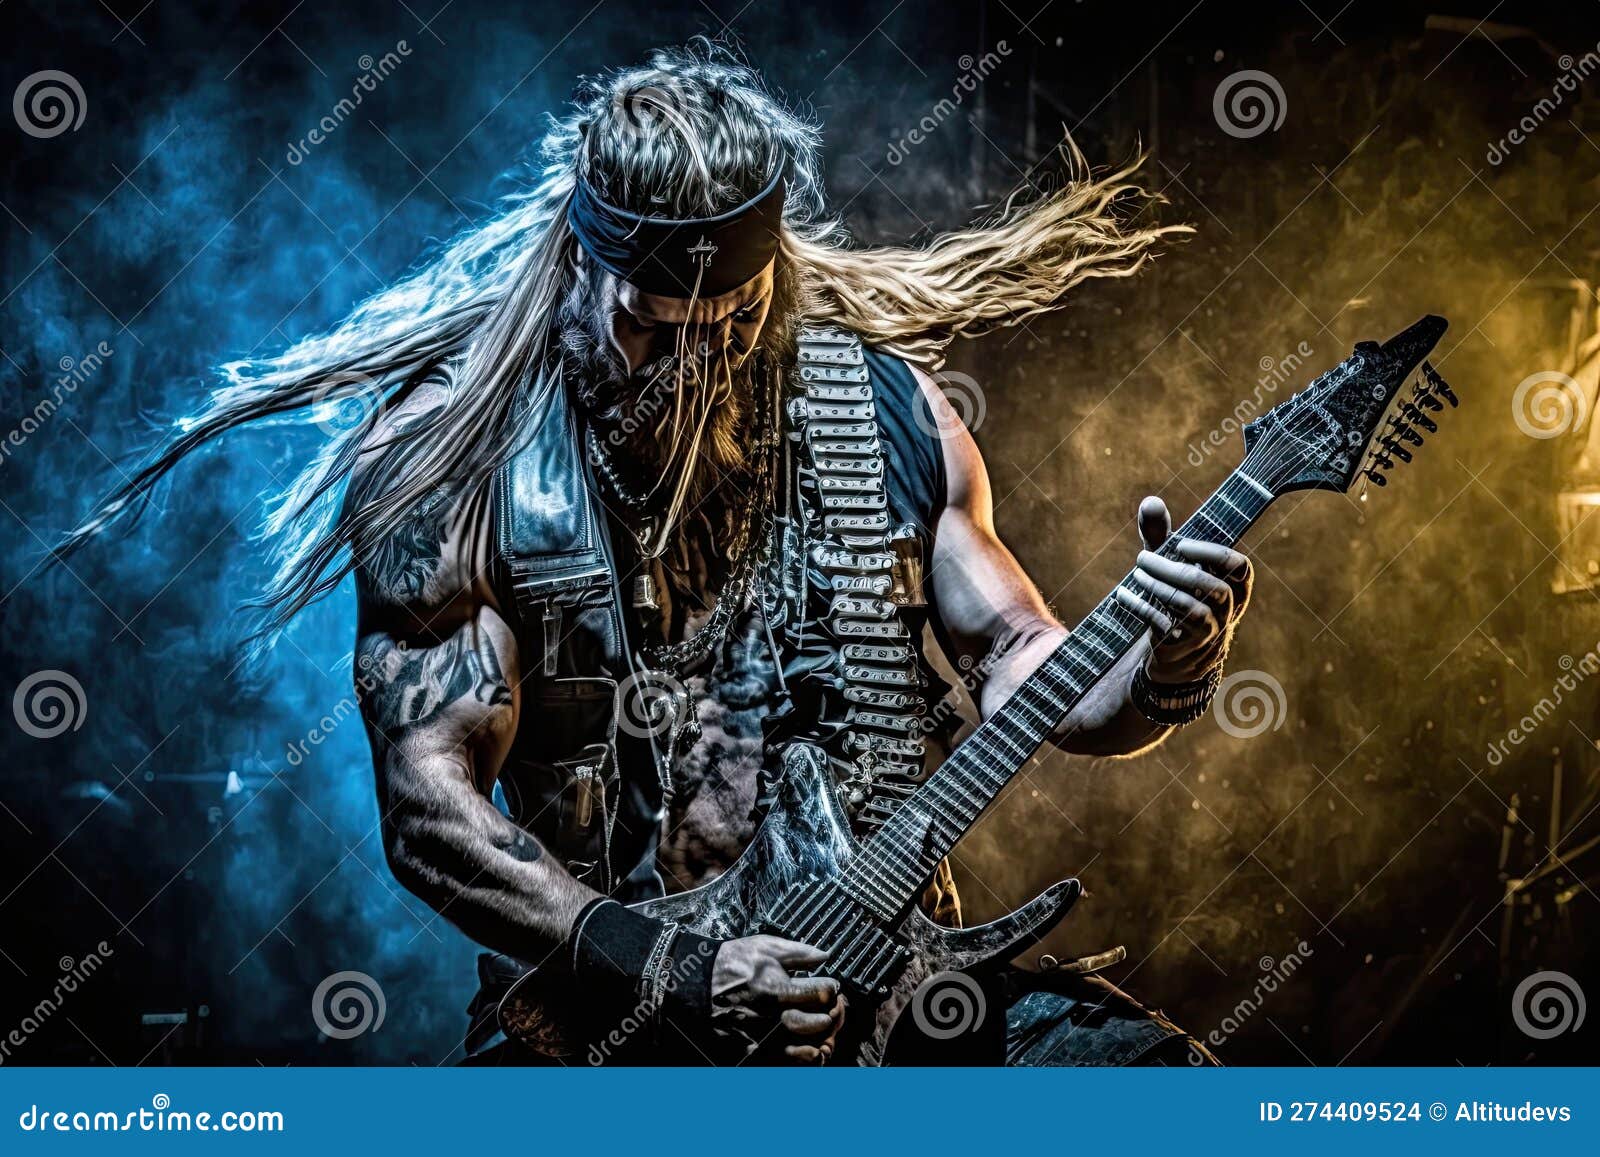 Heavy Metal Guitarist, with Their Instrument and Gear in the